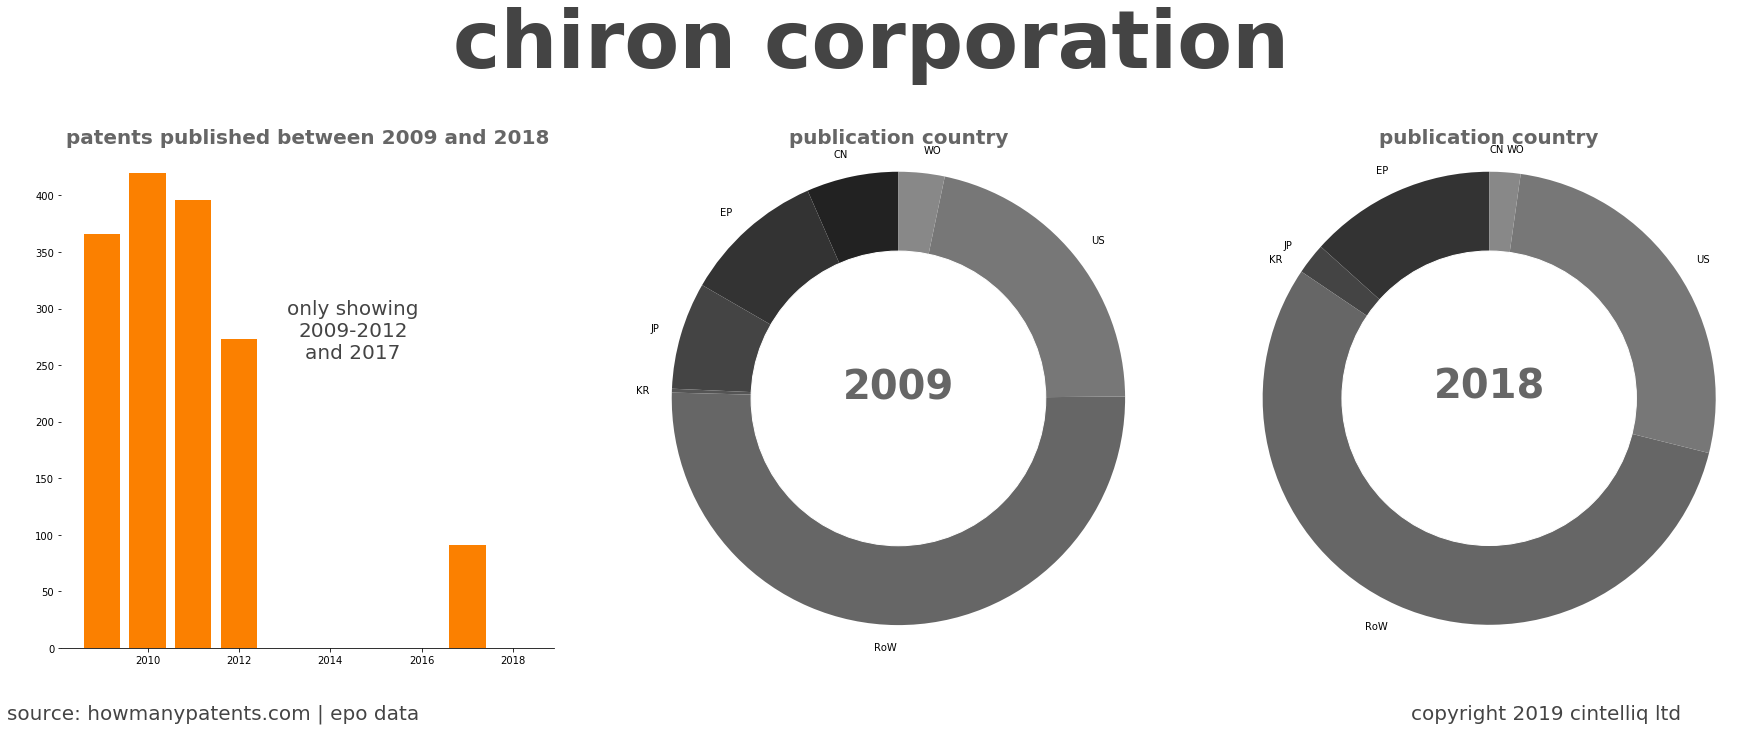 summary of patents for Chiron Corporation